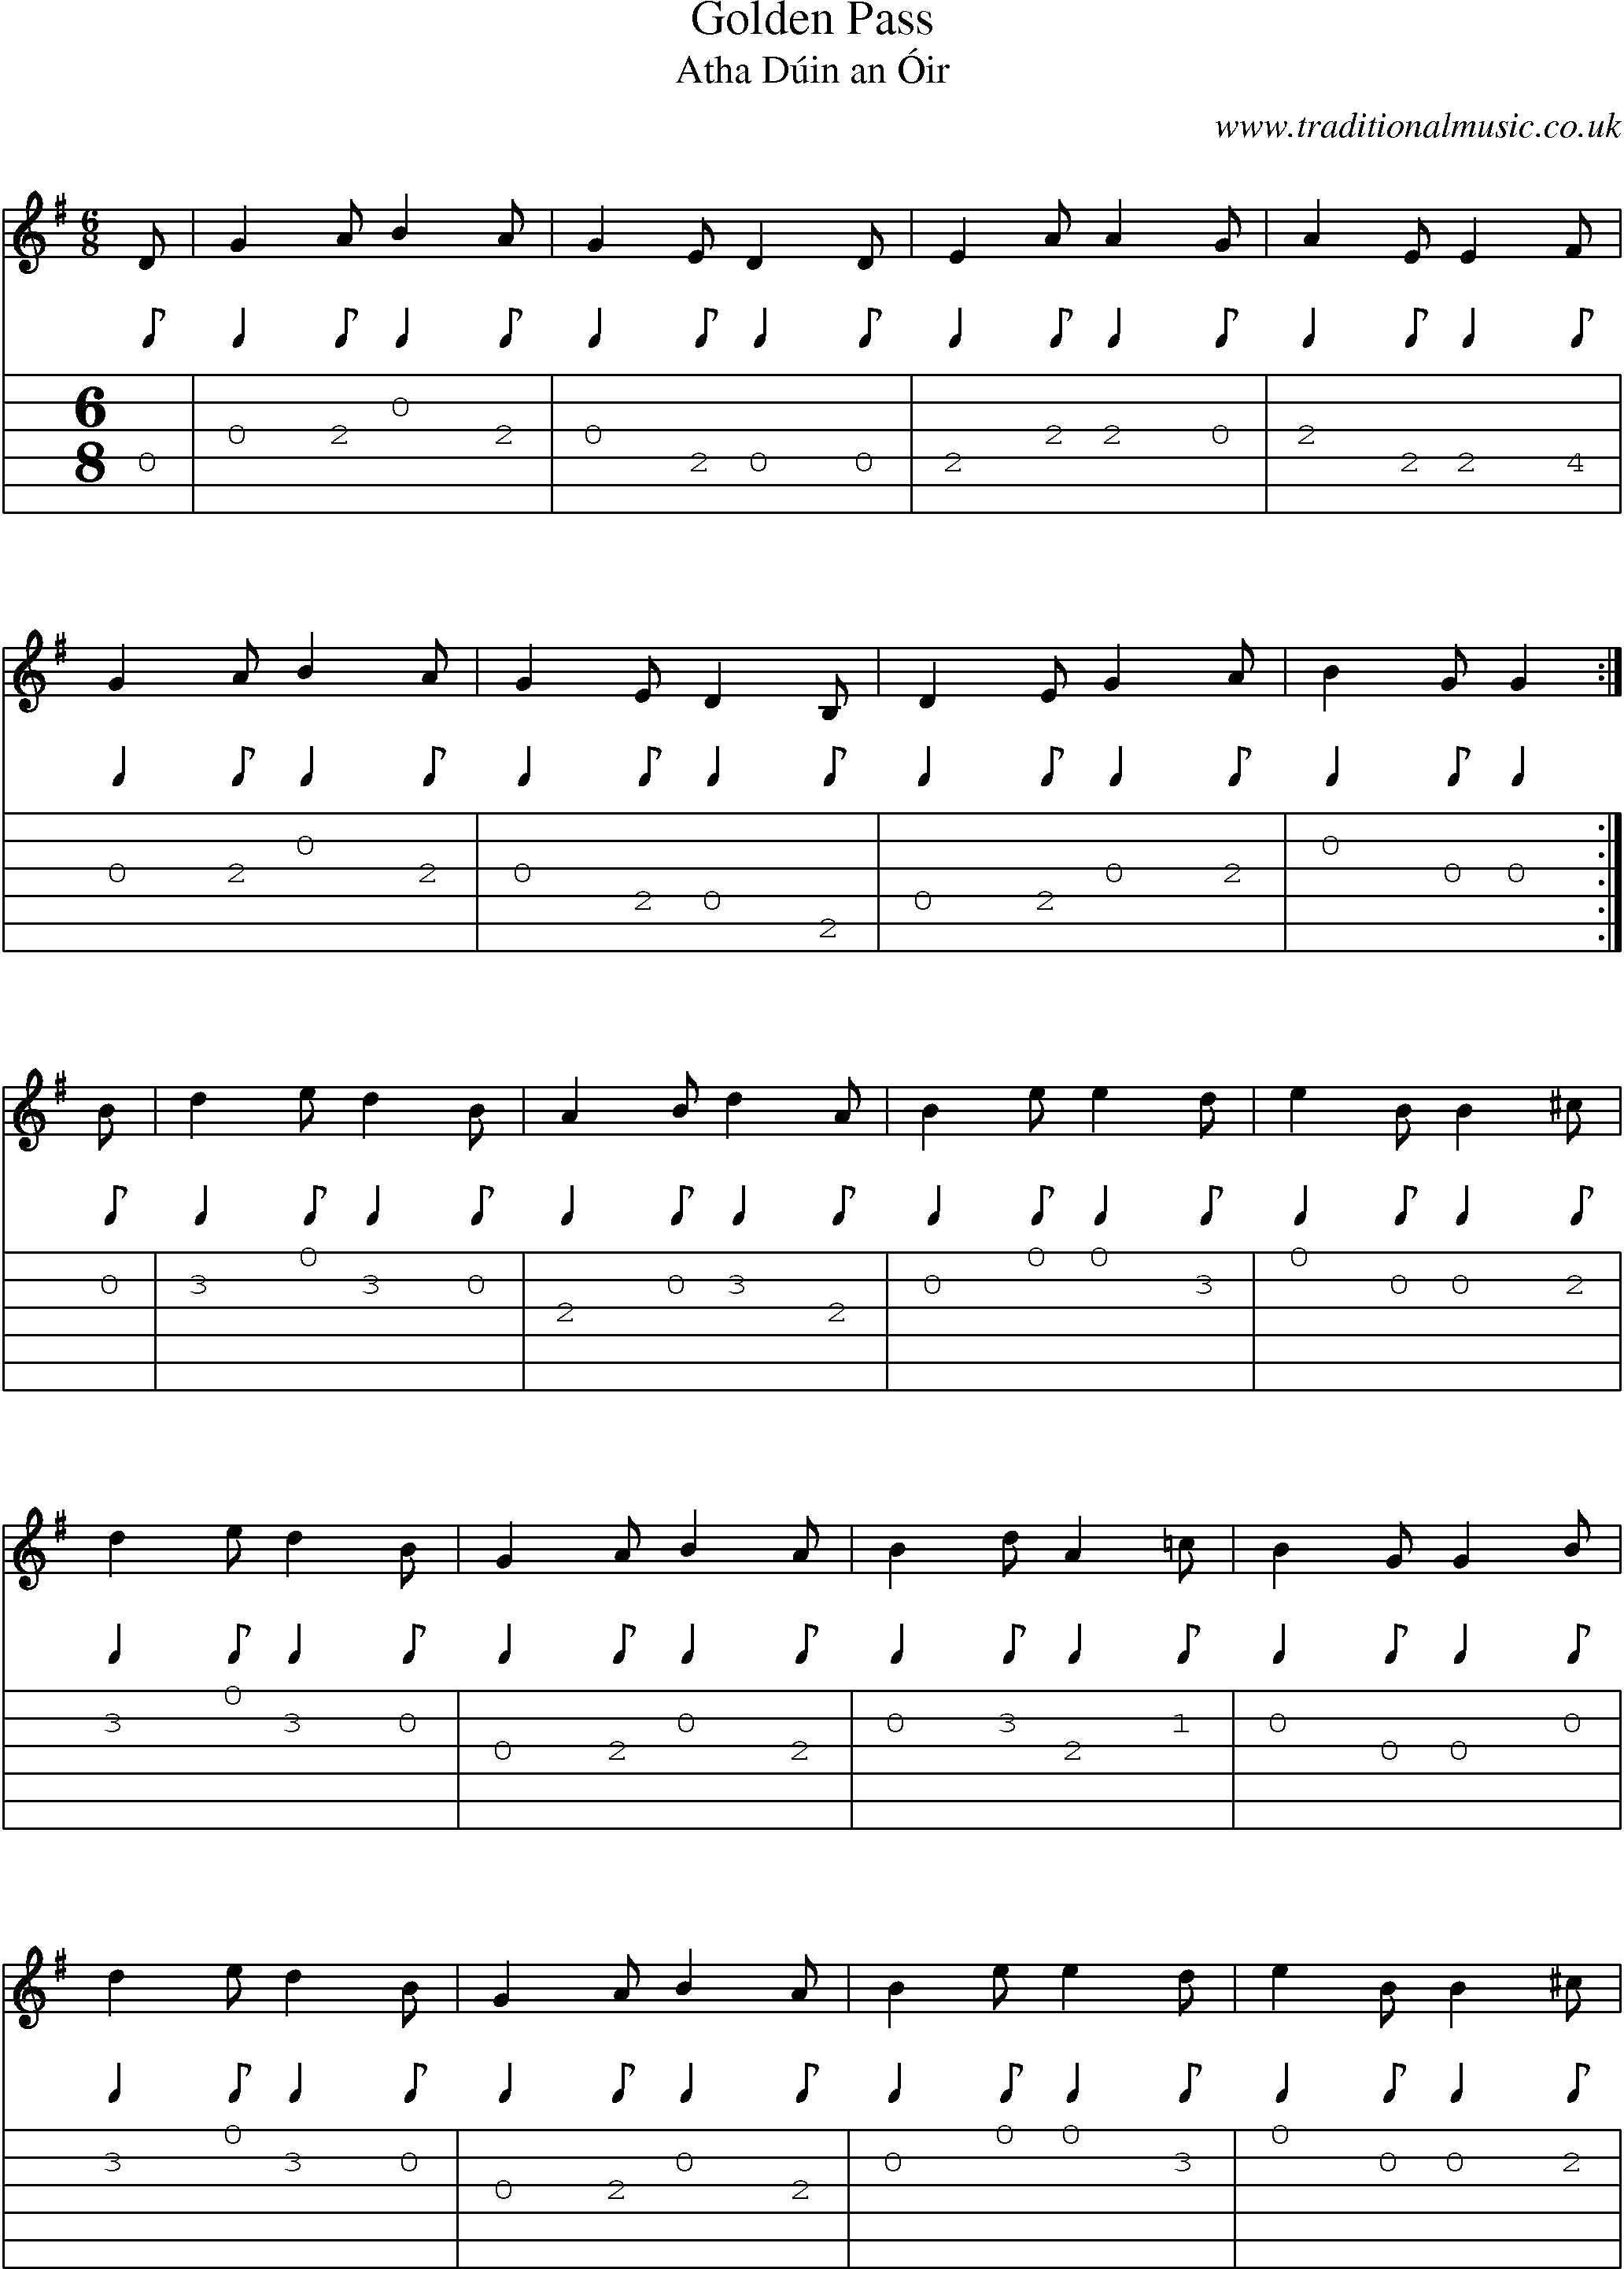 Music Score and Guitar Tabs for Golden Pass